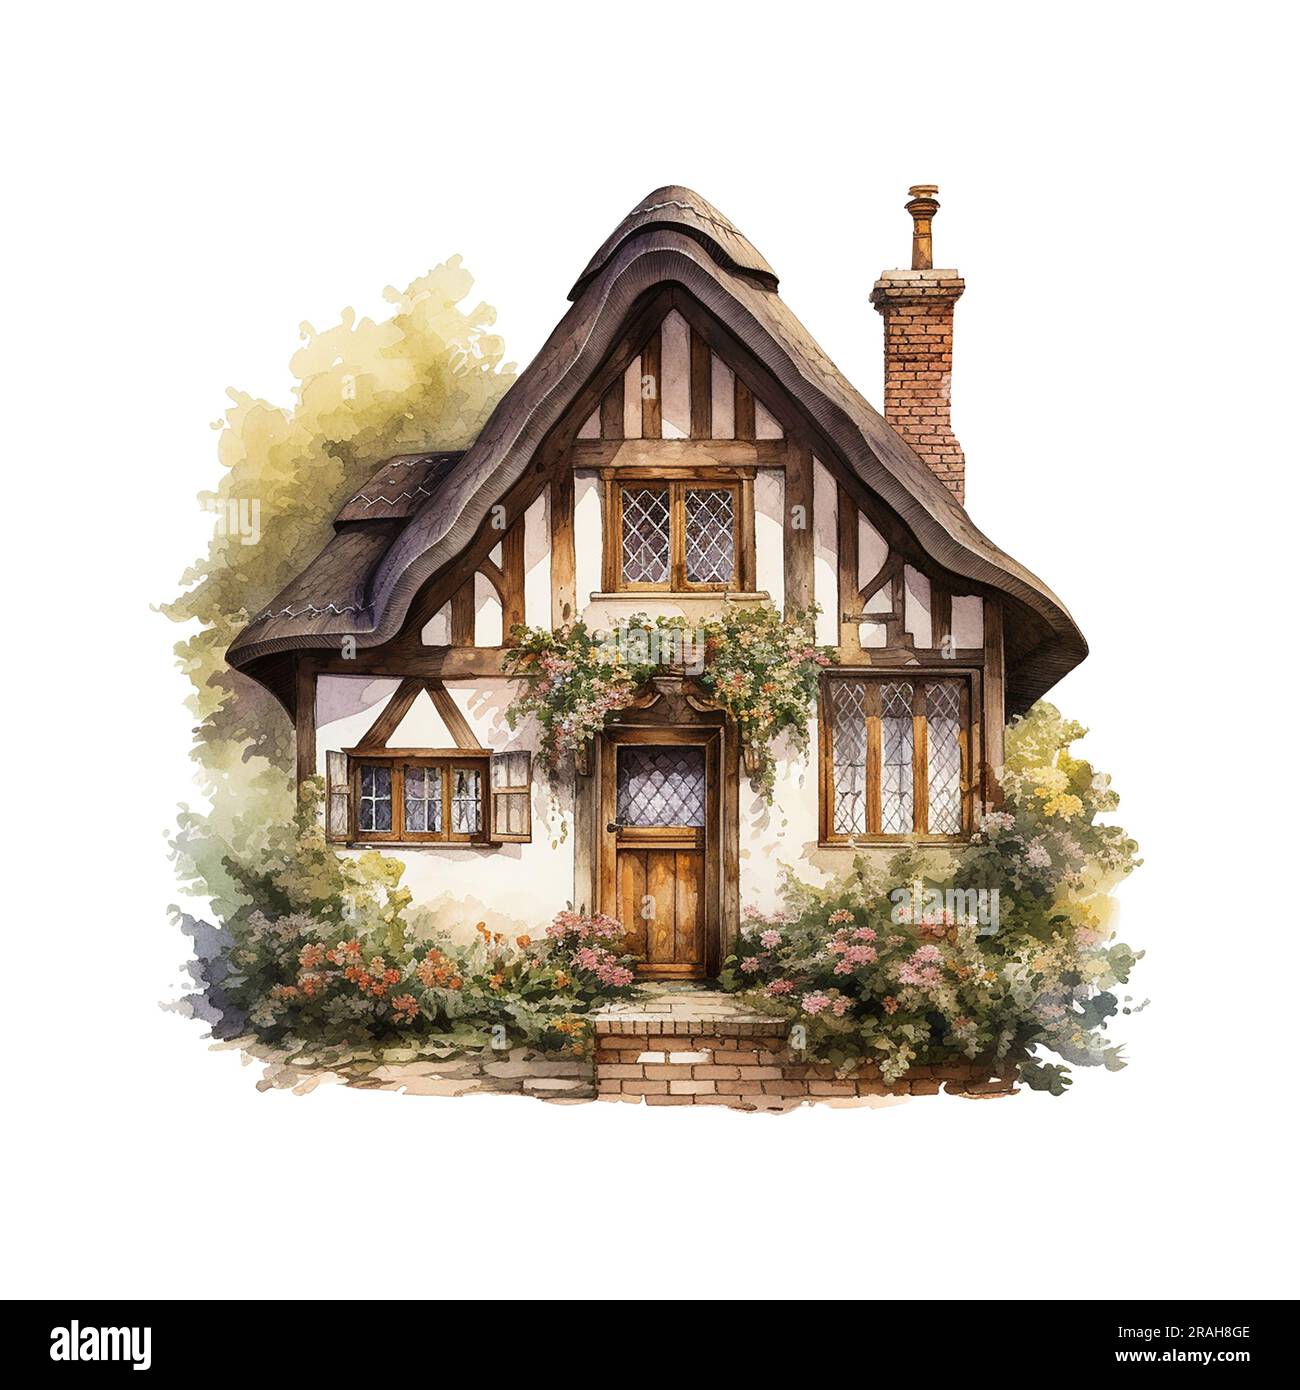 Hand drawn illustration of traditional English village house isolated on white background. Watercolor cozy house with thatched roof, plants and sky. Stock Photo